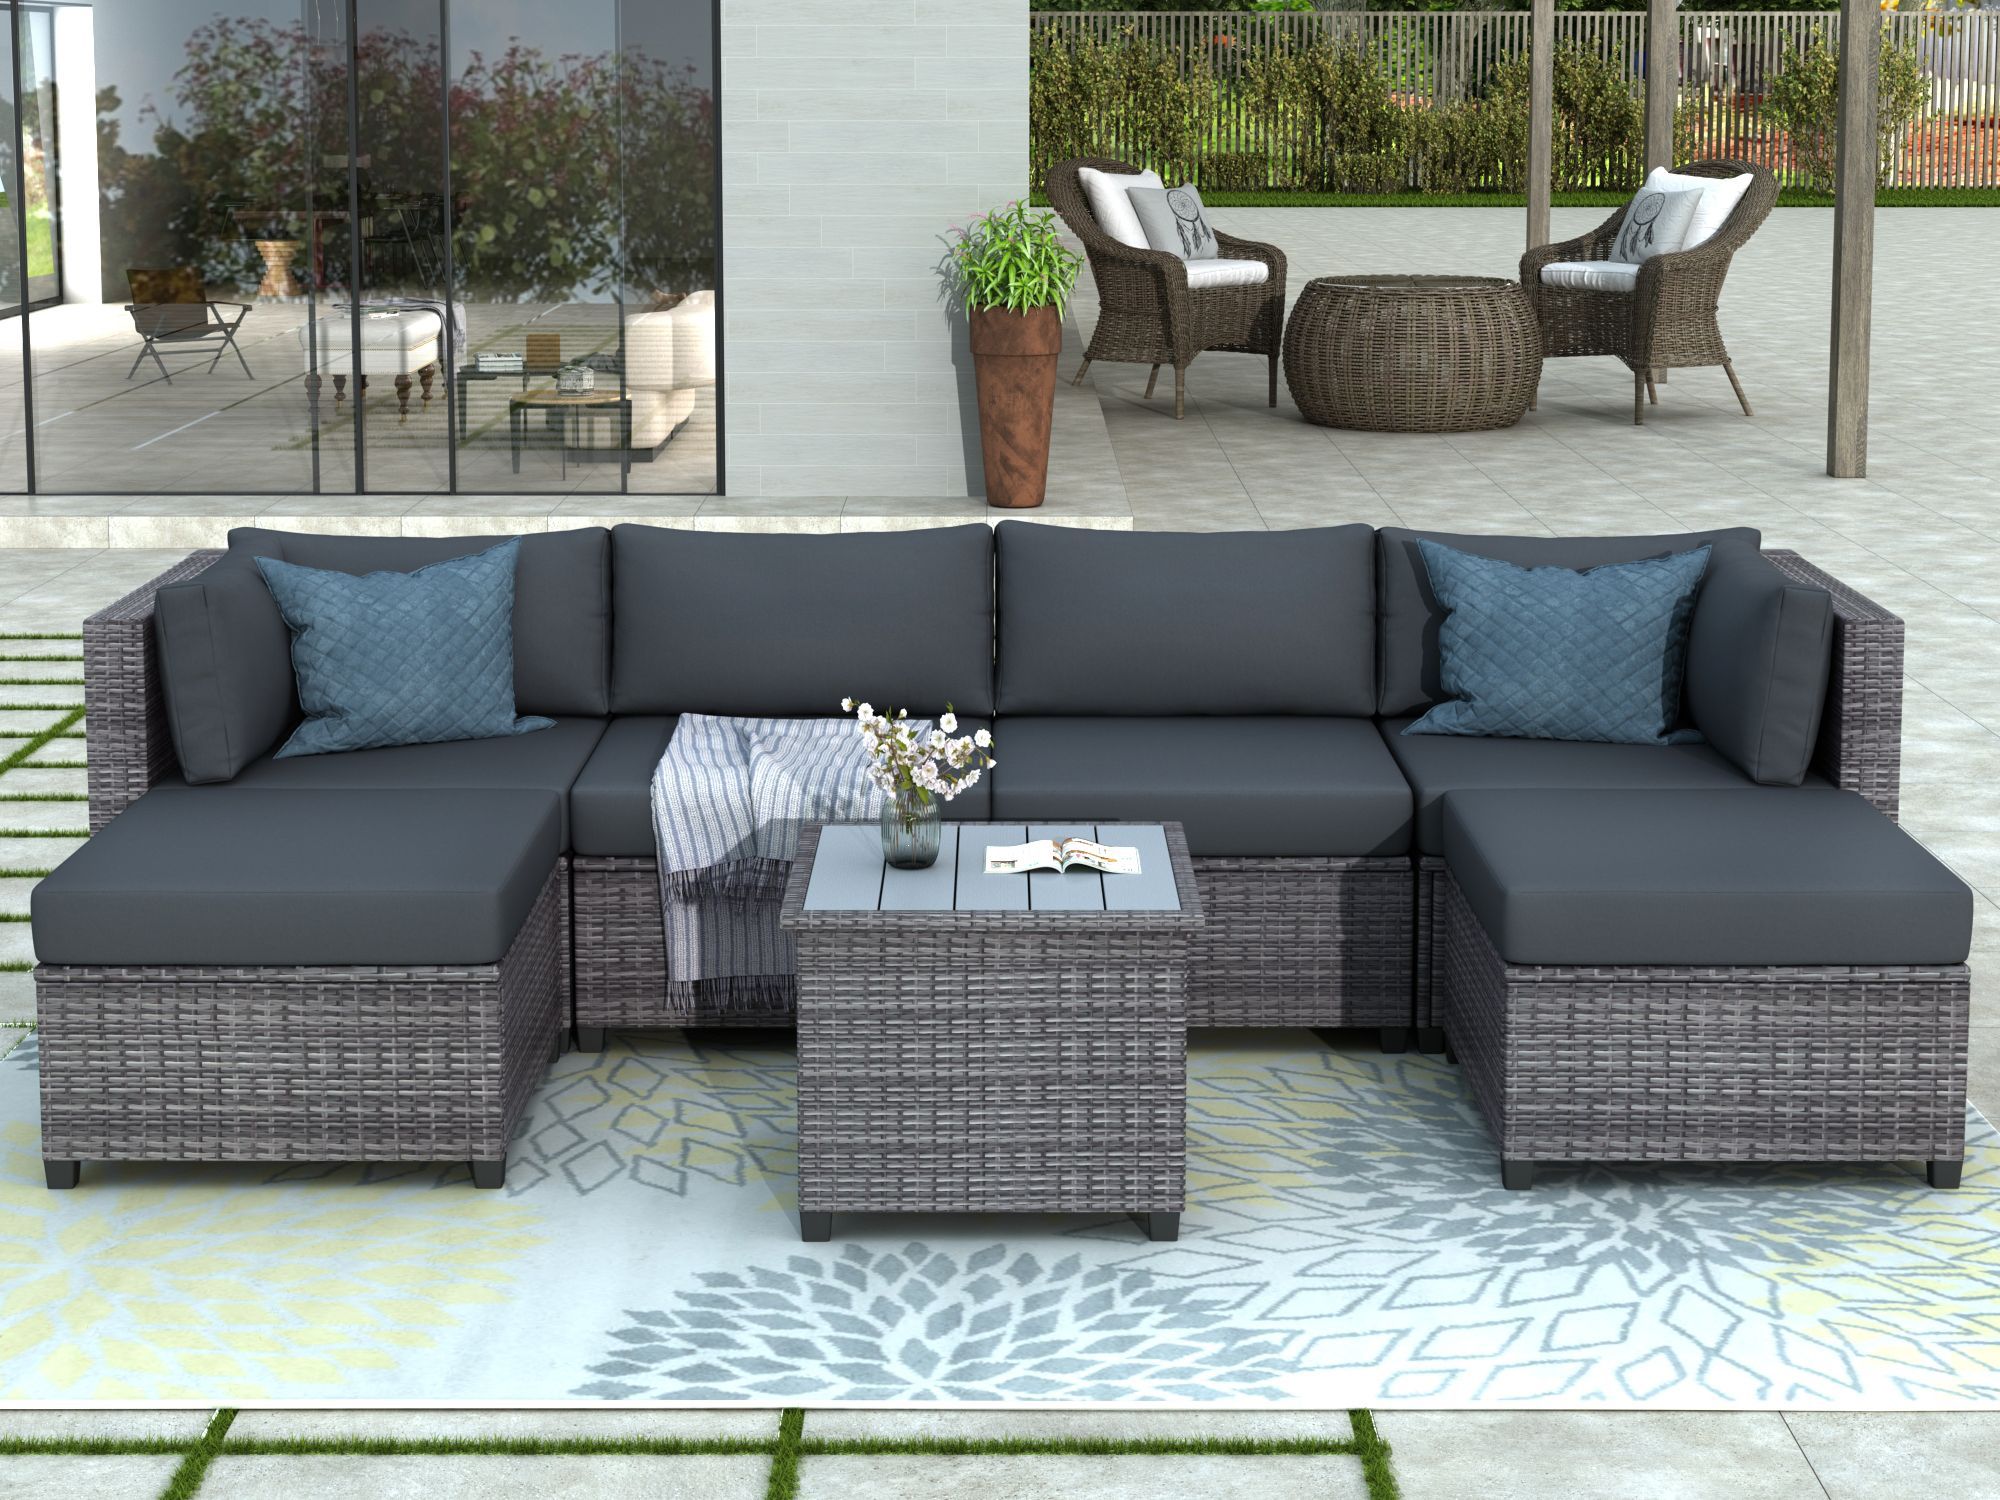 7 Piece Patio Furniture Set with 4 Rattan Wicker Chairs, 2 Ottoman, Coffee Table, All-Weather Outdoor Conversation Set with Gray Cushions for Backyard, Porch, Garden, Poolside, L5017 - 7 Piece Patio Furniture Set with 4 Rattan Wicker Chairs, 2 Ottoman, Coffee Table, All-Weather Outdoor Conversation Set with Gray Cushions for Backyard, Porch, Garden, Poolside, L5017 -   20 diy Garden sofa ideas